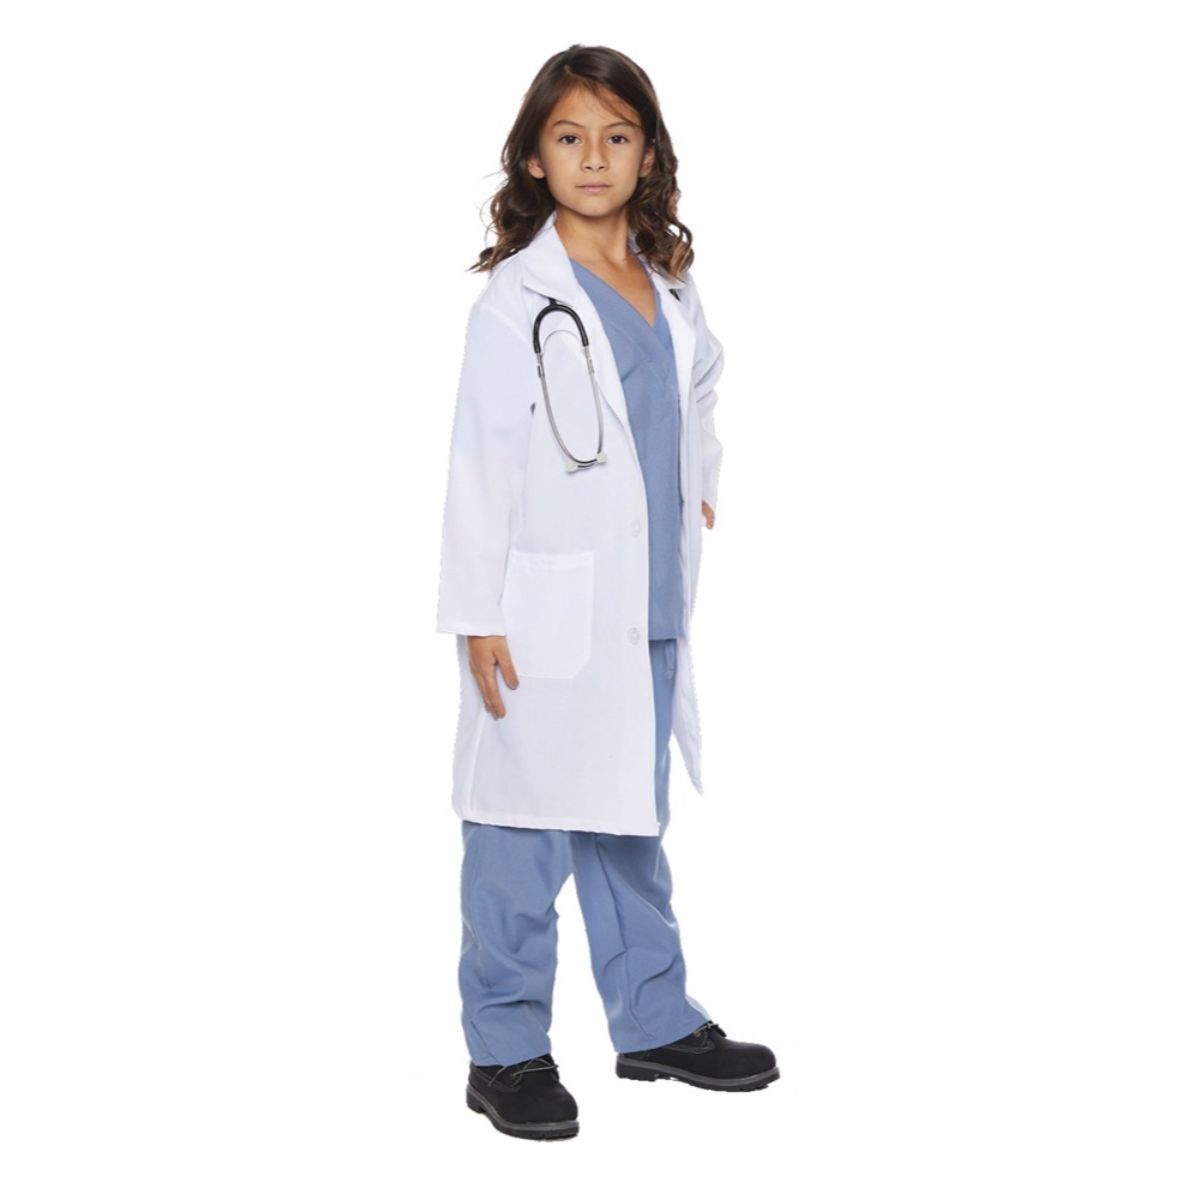 The Costume Center White and Blue Doctor Scrubs with Lab Coat Girl Child Halloween Costume - Large